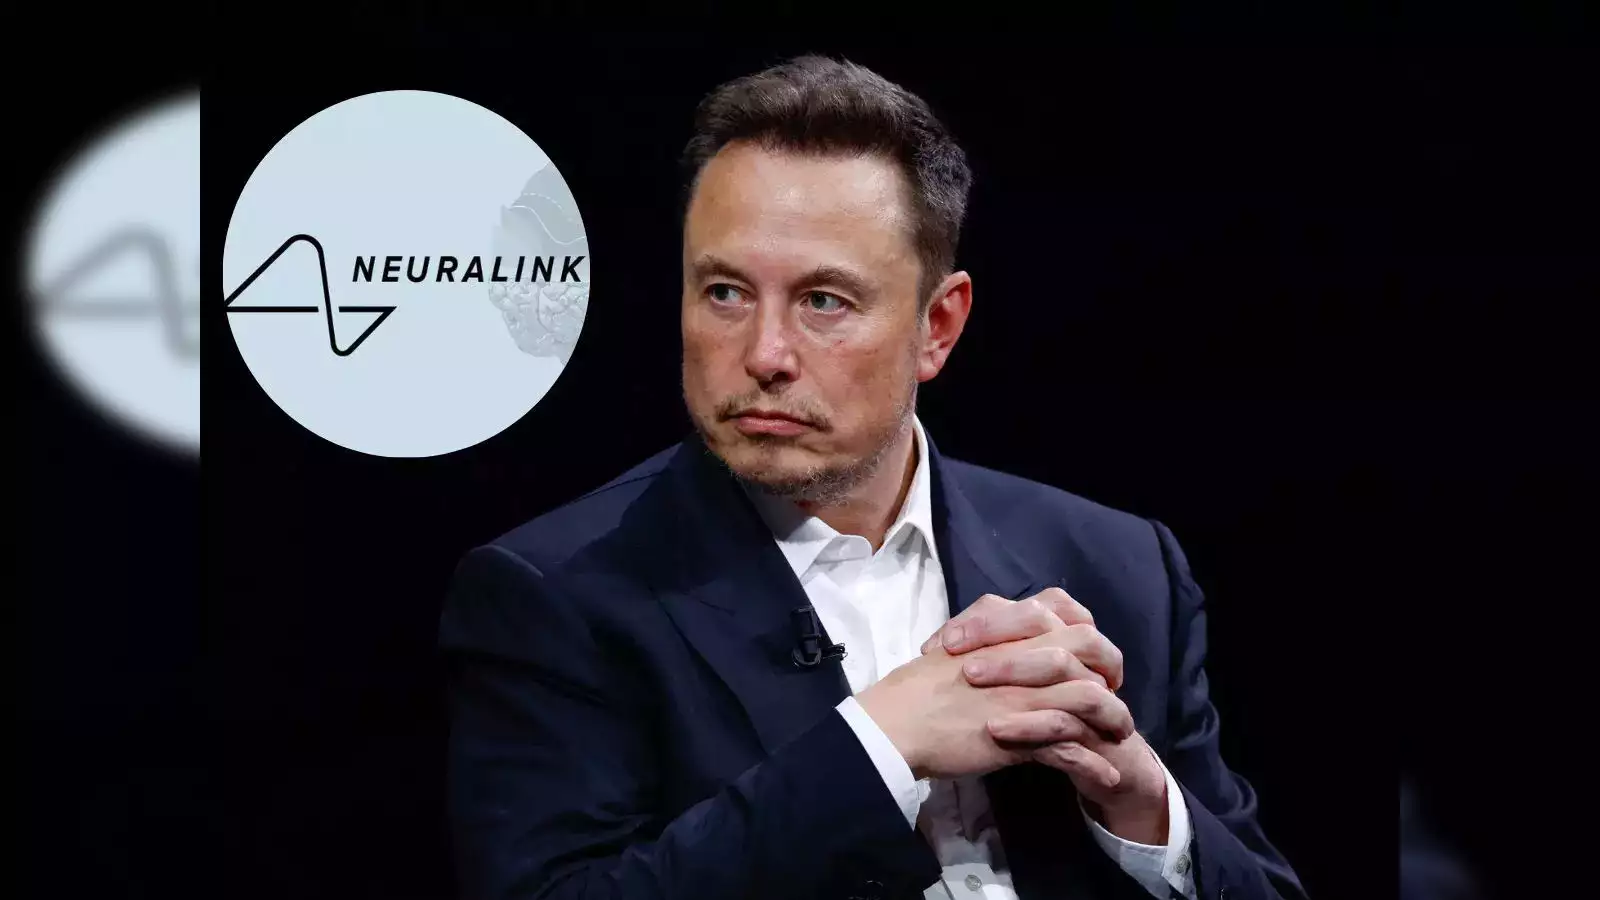 Elon Musk Launches Second Trial for Neuralink A New Hope for People with Paralysis to Control Computers by Thought